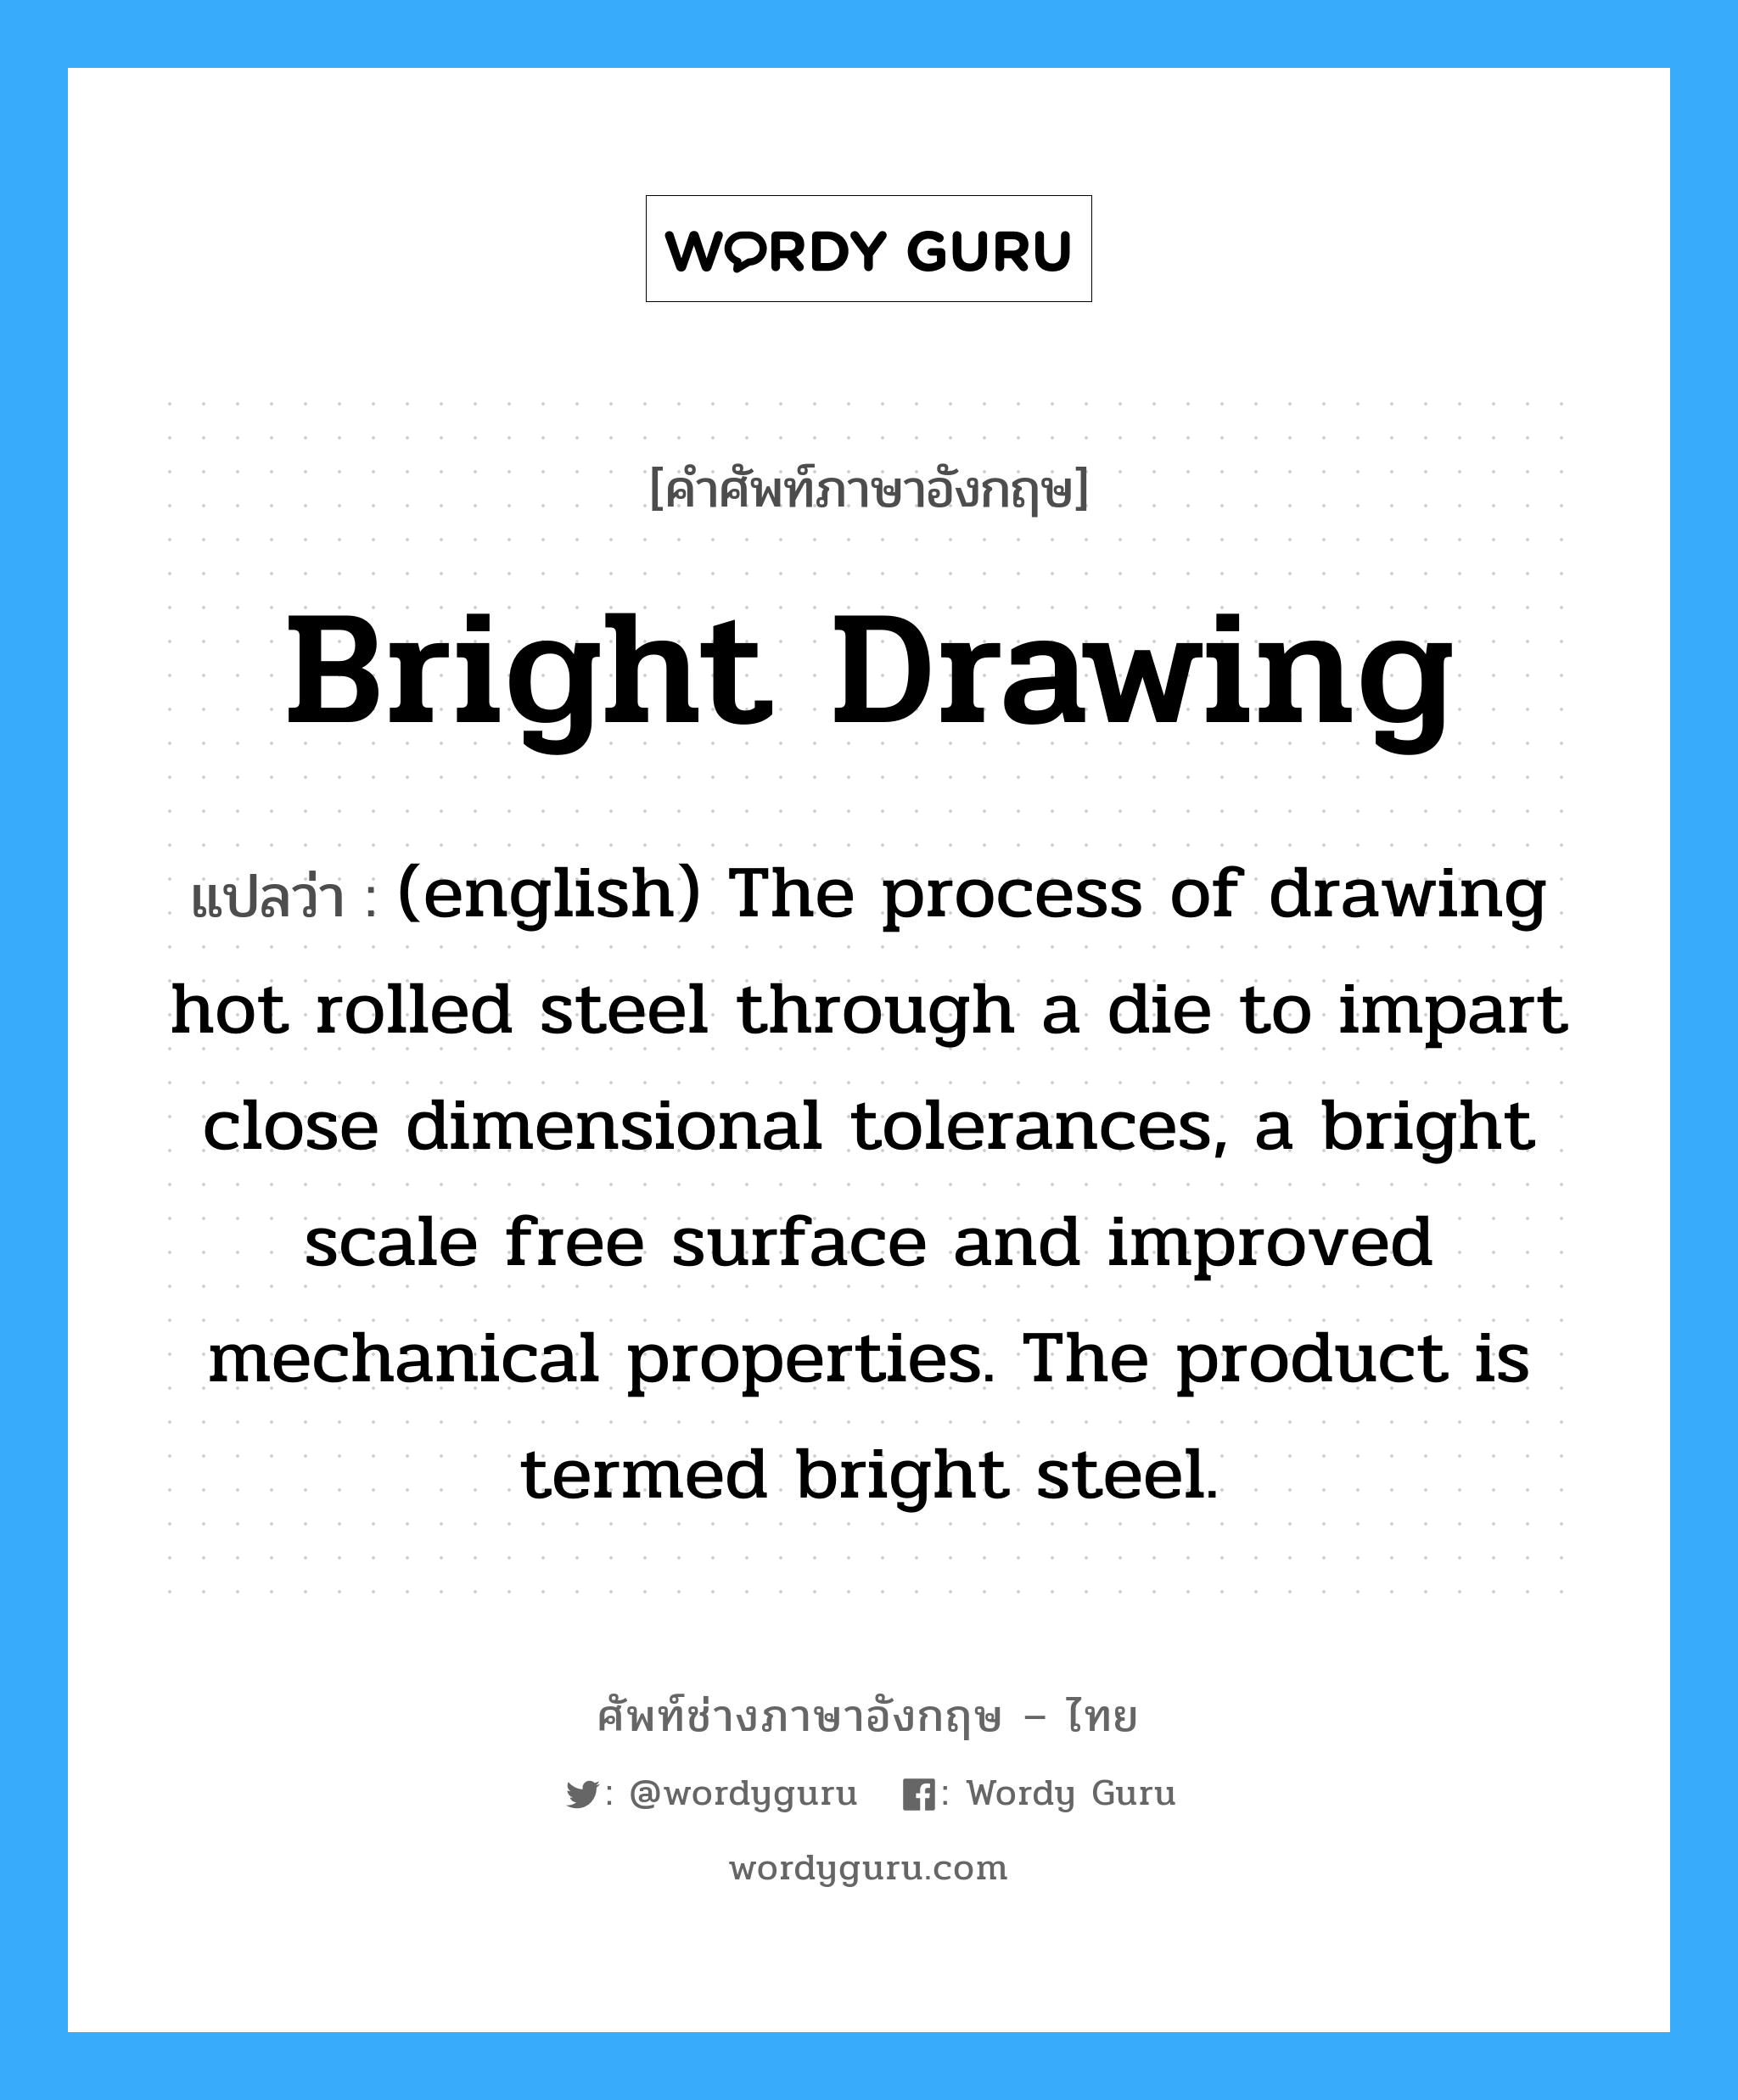 Bright Drawing แปลว่า?, คำศัพท์ช่างภาษาอังกฤษ - ไทย Bright Drawing คำศัพท์ภาษาอังกฤษ Bright Drawing แปลว่า (english) The process of drawing hot rolled steel through a die to impart close dimensional tolerances, a bright scale free surface and improved mechanical properties. The product is termed bright steel.